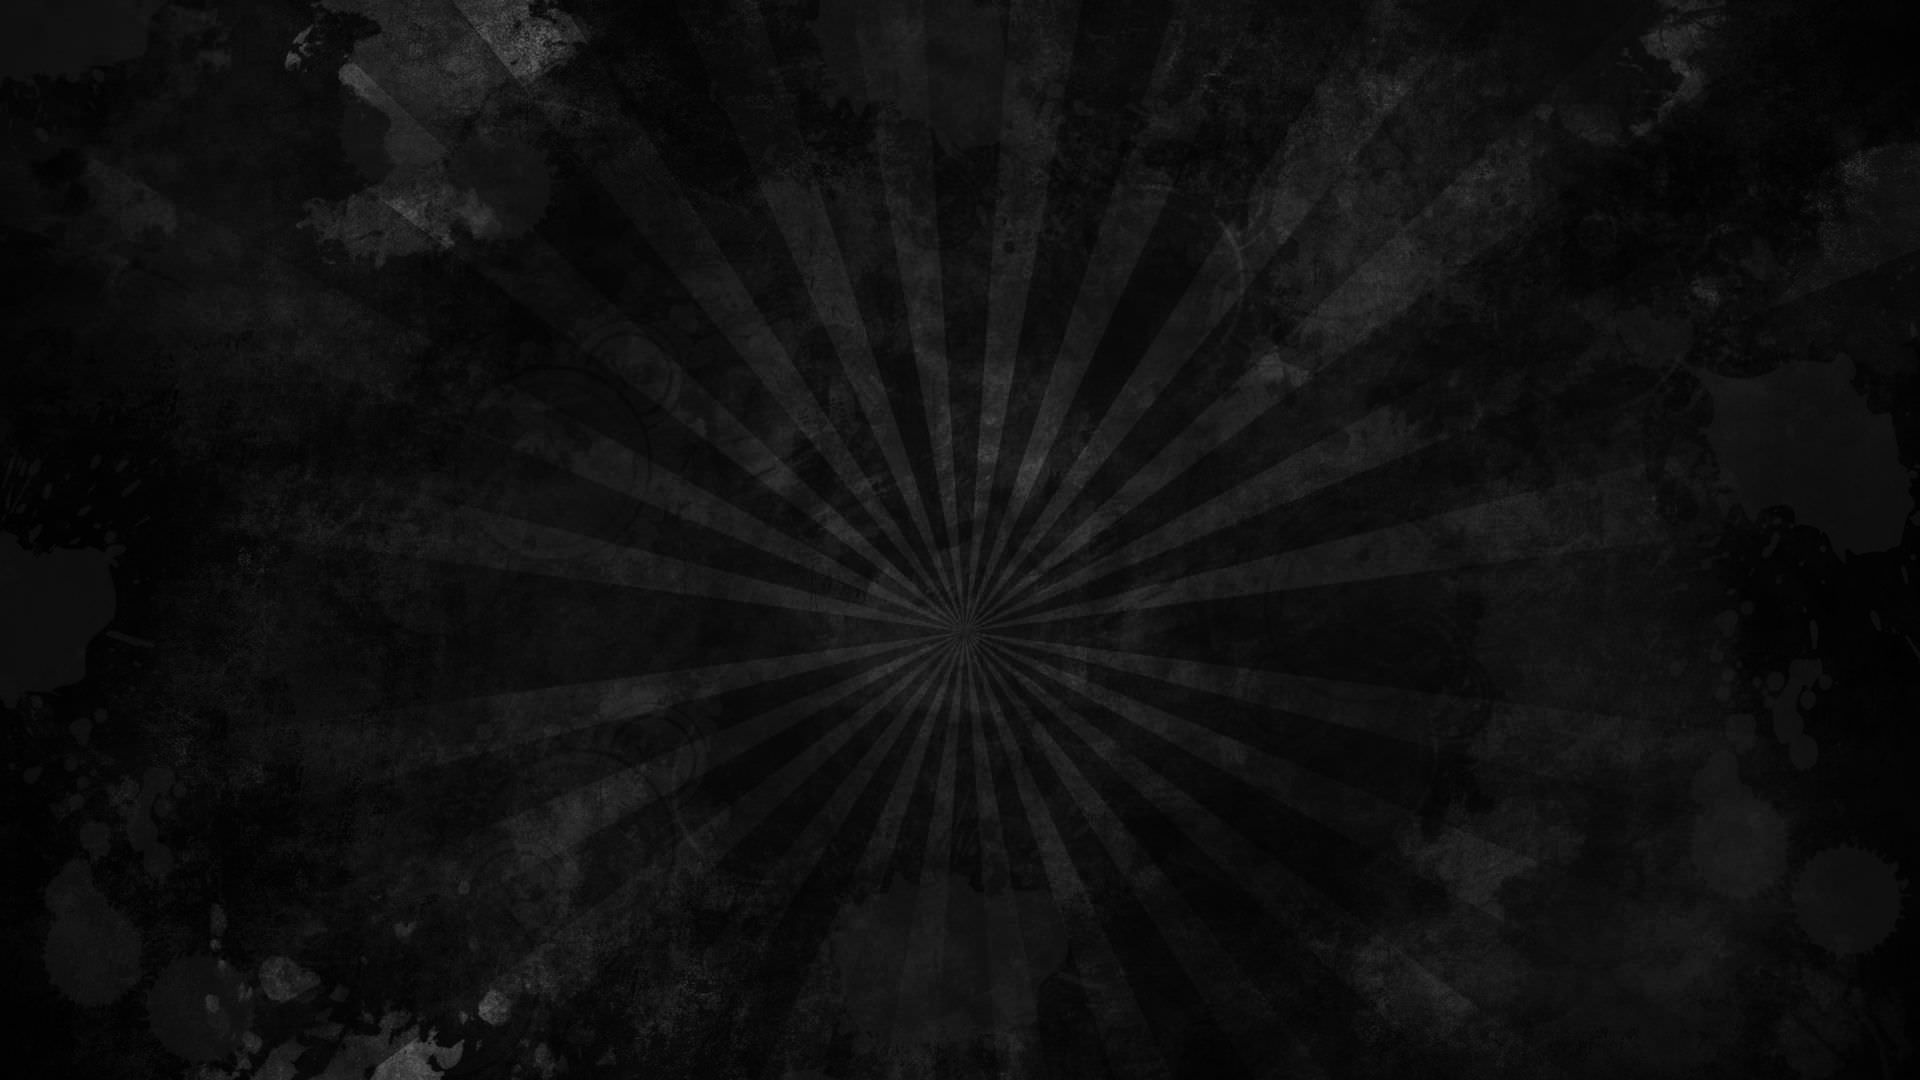 Black Grunge Wallpapers Best Of 19 Tumblr Grunge Backgrounds ·① Download Free Cool High Resolution Wallpapers for Desktop This Month